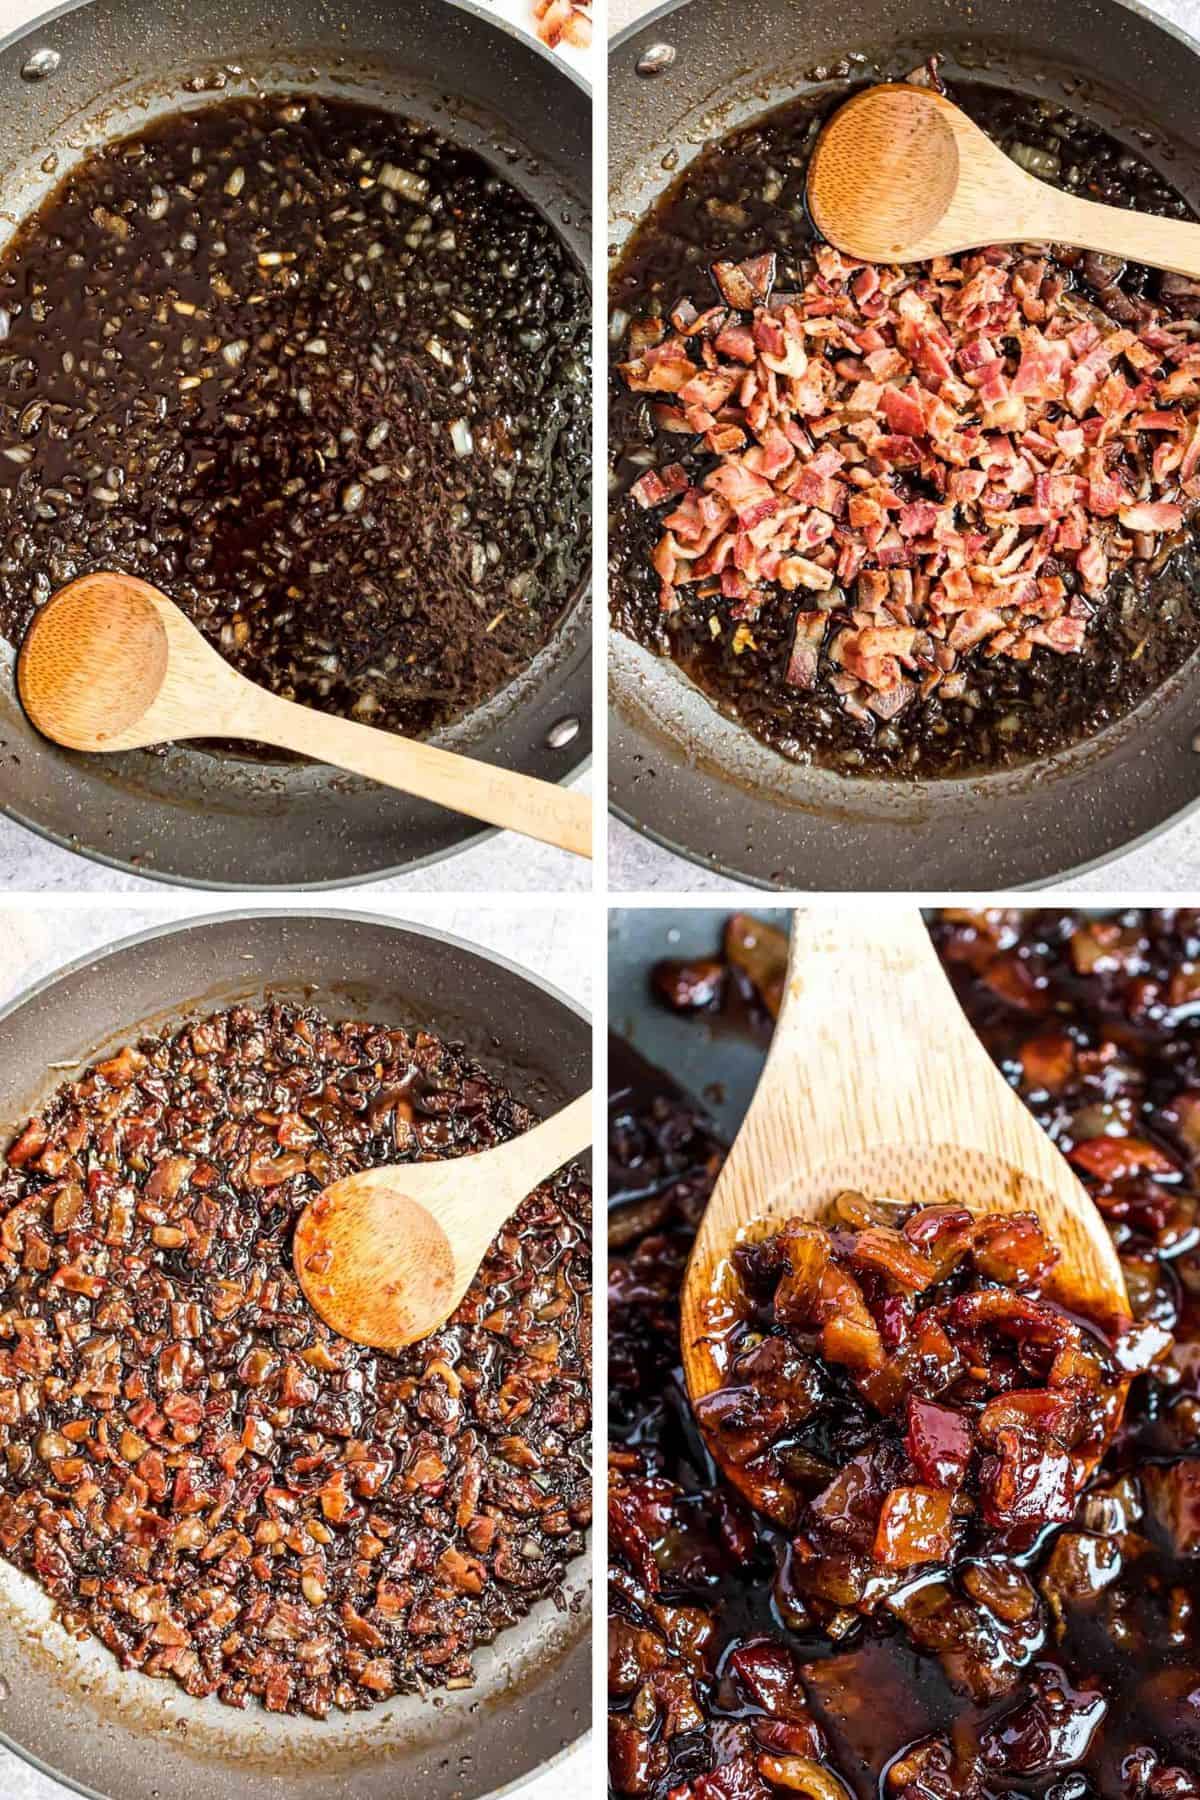 4 images of bacon jam getting thick, finished product in lower right hand corner.